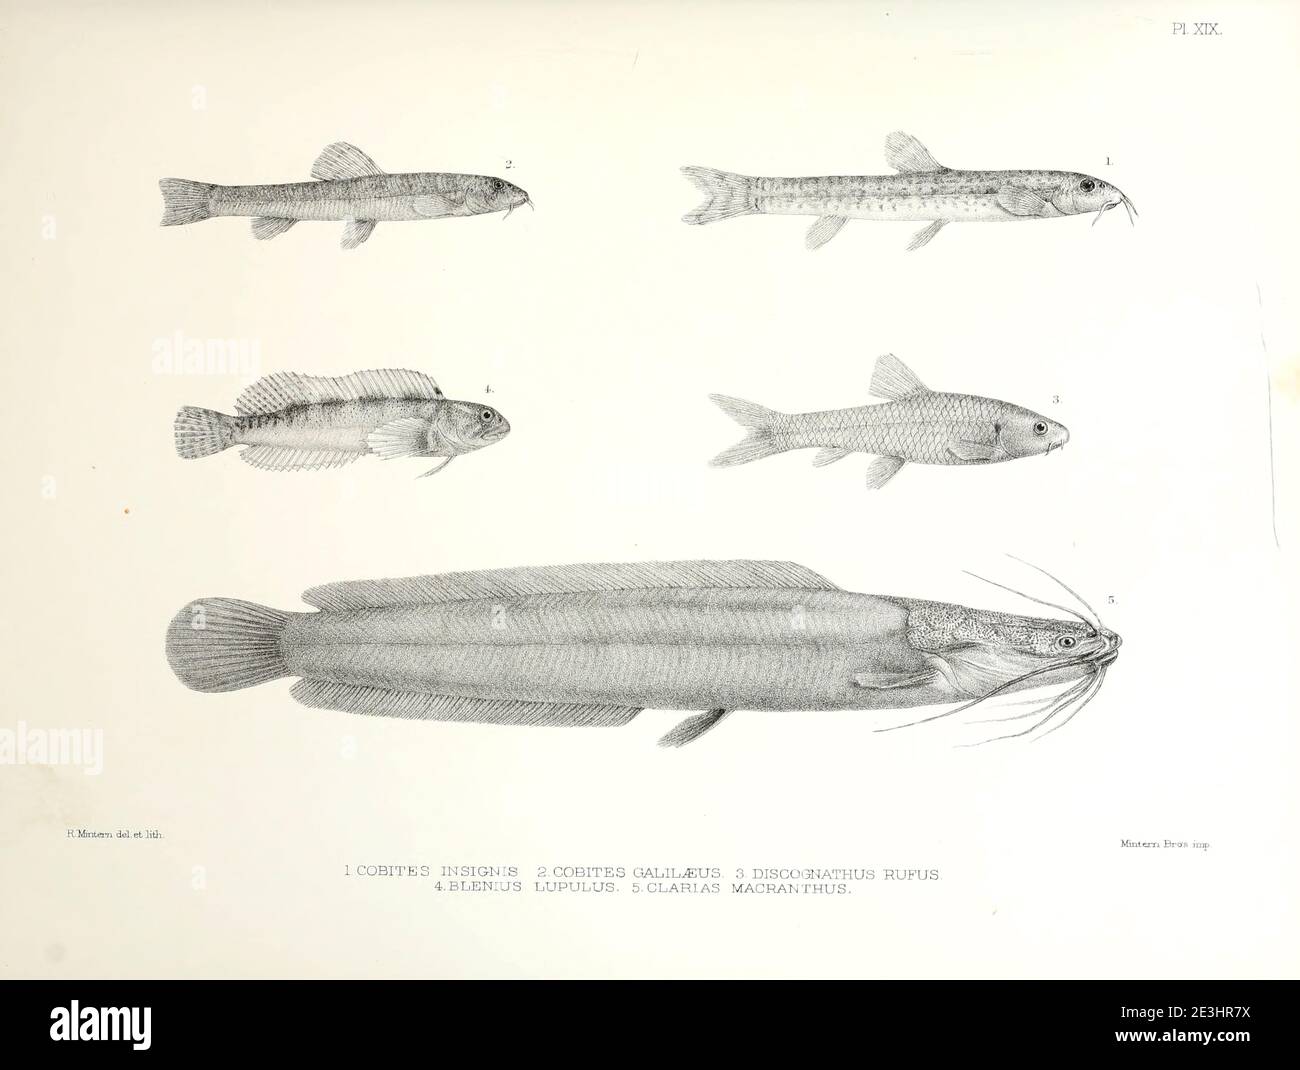 Various fish species : Cobites insignis, C. galilaeus, Discognathus rufus, Blennius lupulus, Clarias macracanthus From the survey of western Palestine. The fauna and flora of Palestine by Tristram, H. B. (Henry Baker), 1822-1906 Published by The Committee of the Palestine Exploration Fund, London, 1884 Stock Photo